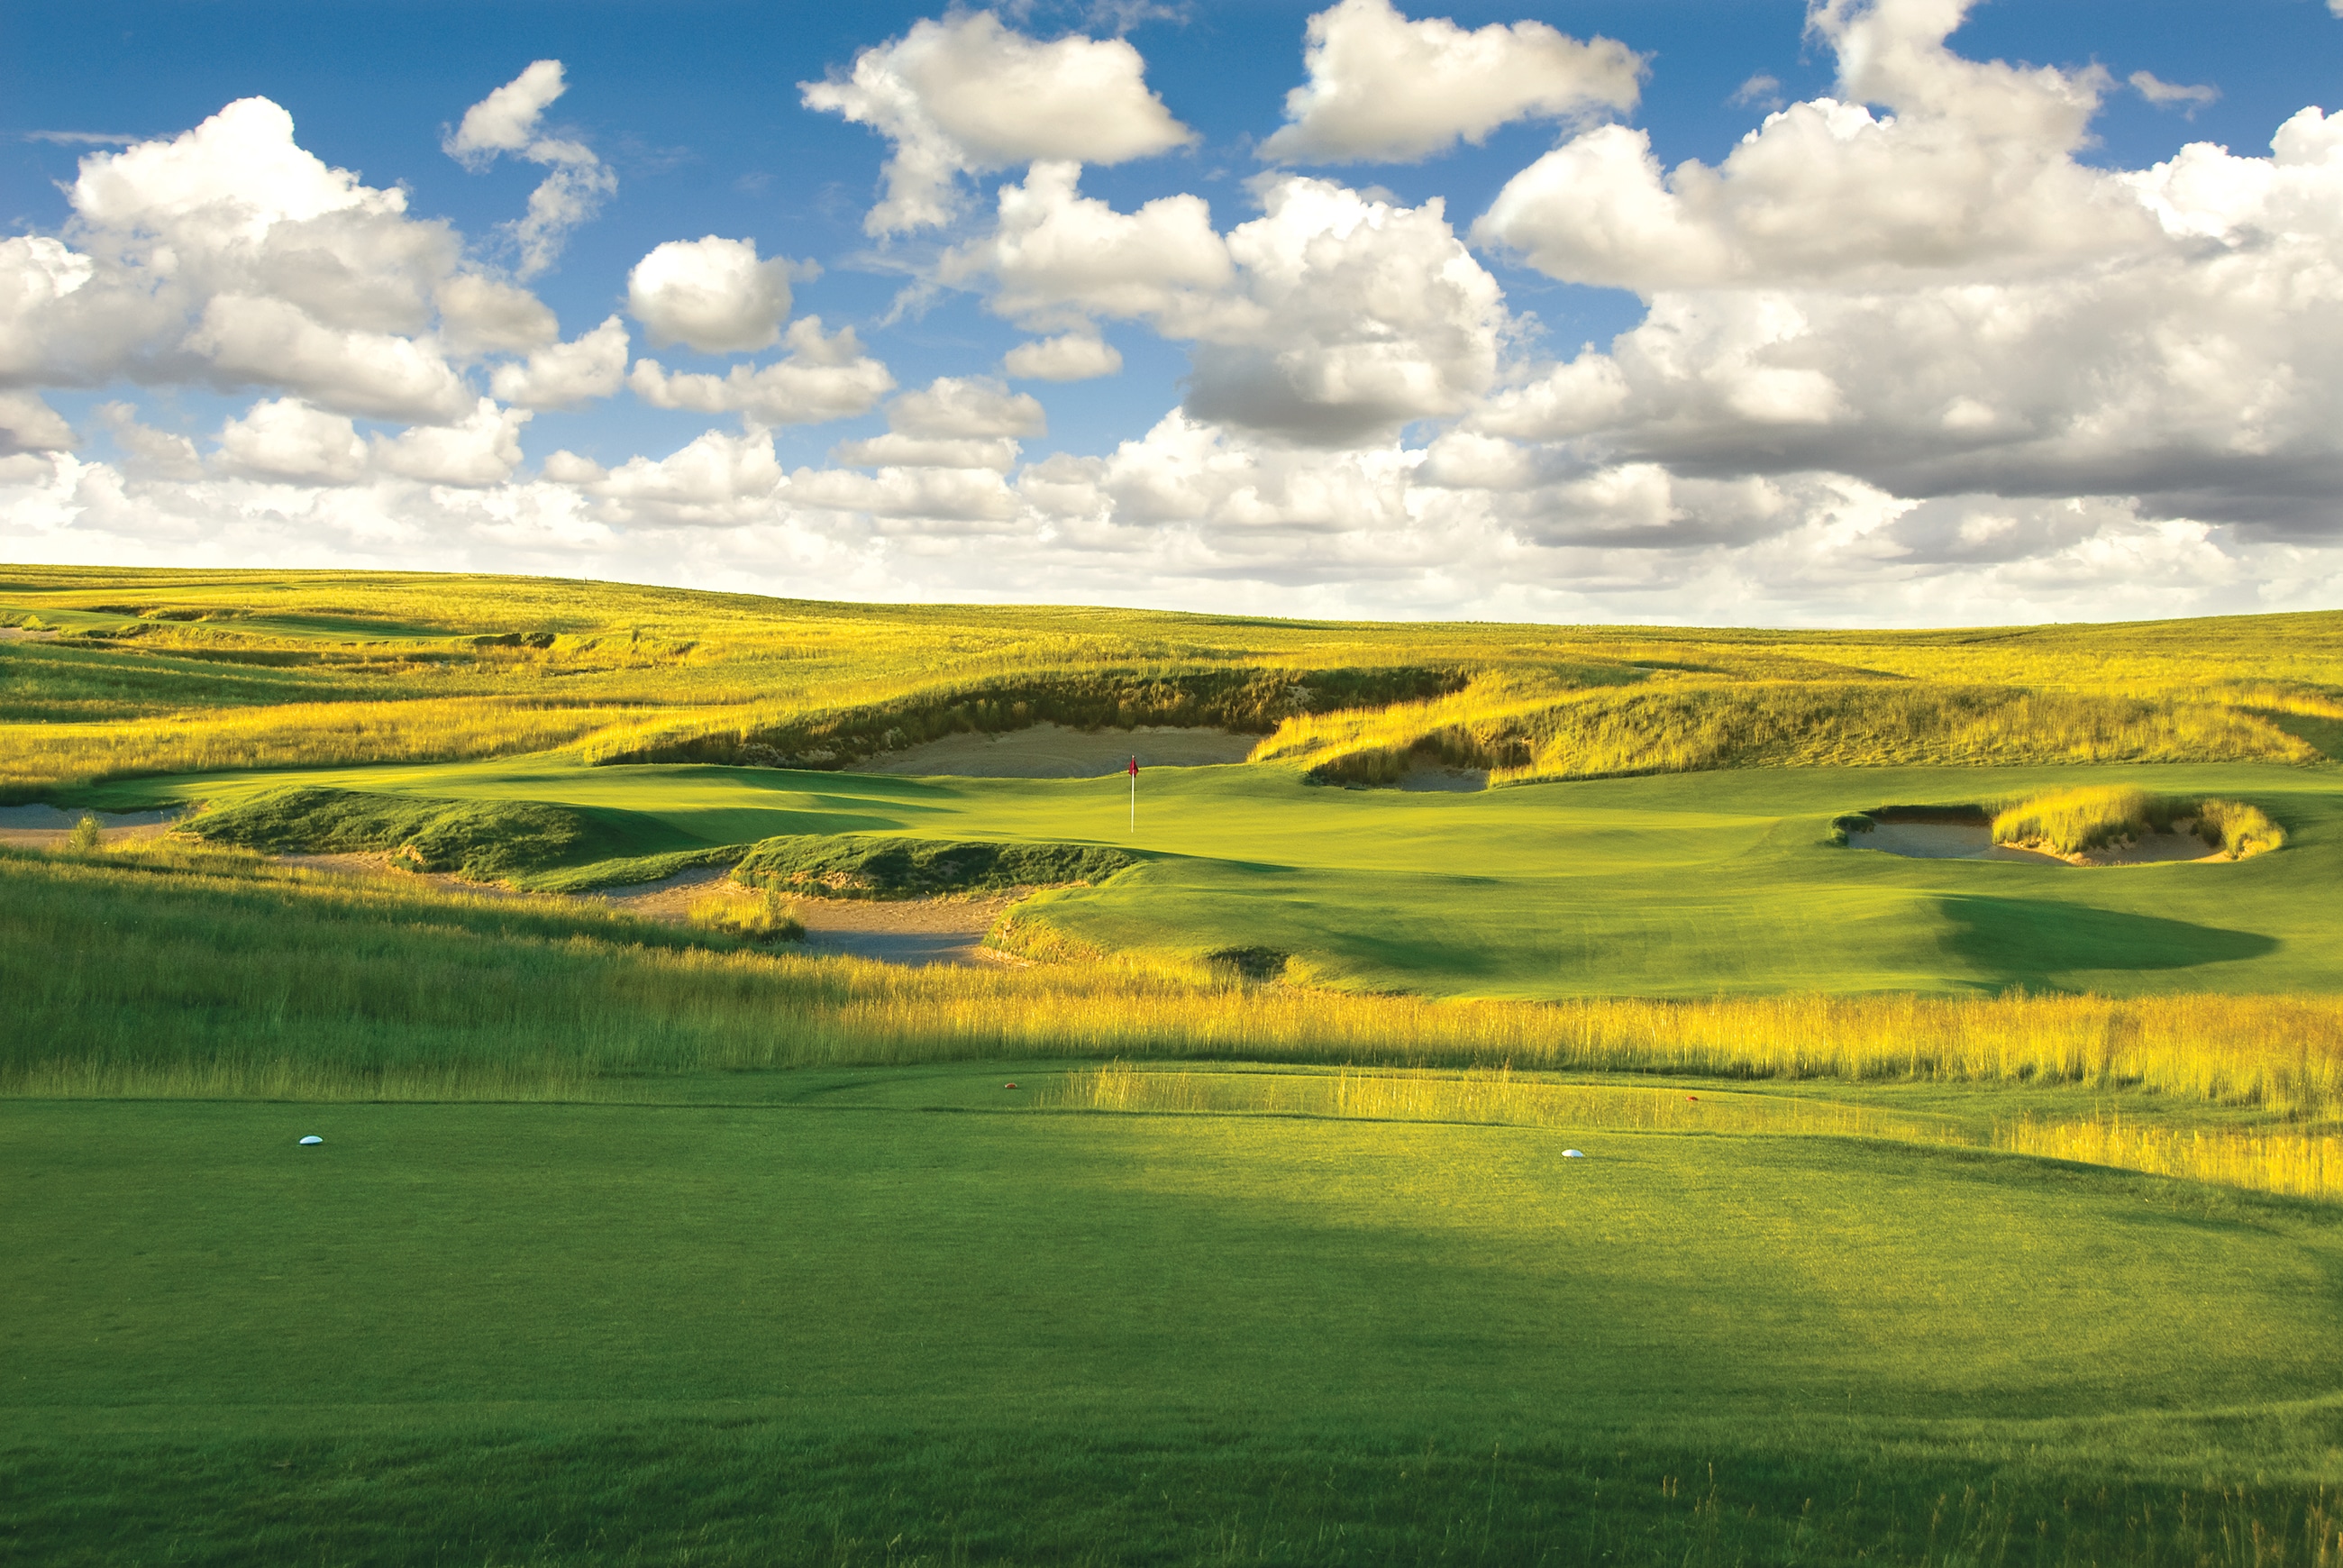 green fairway, links-style rough blue sky and clouds